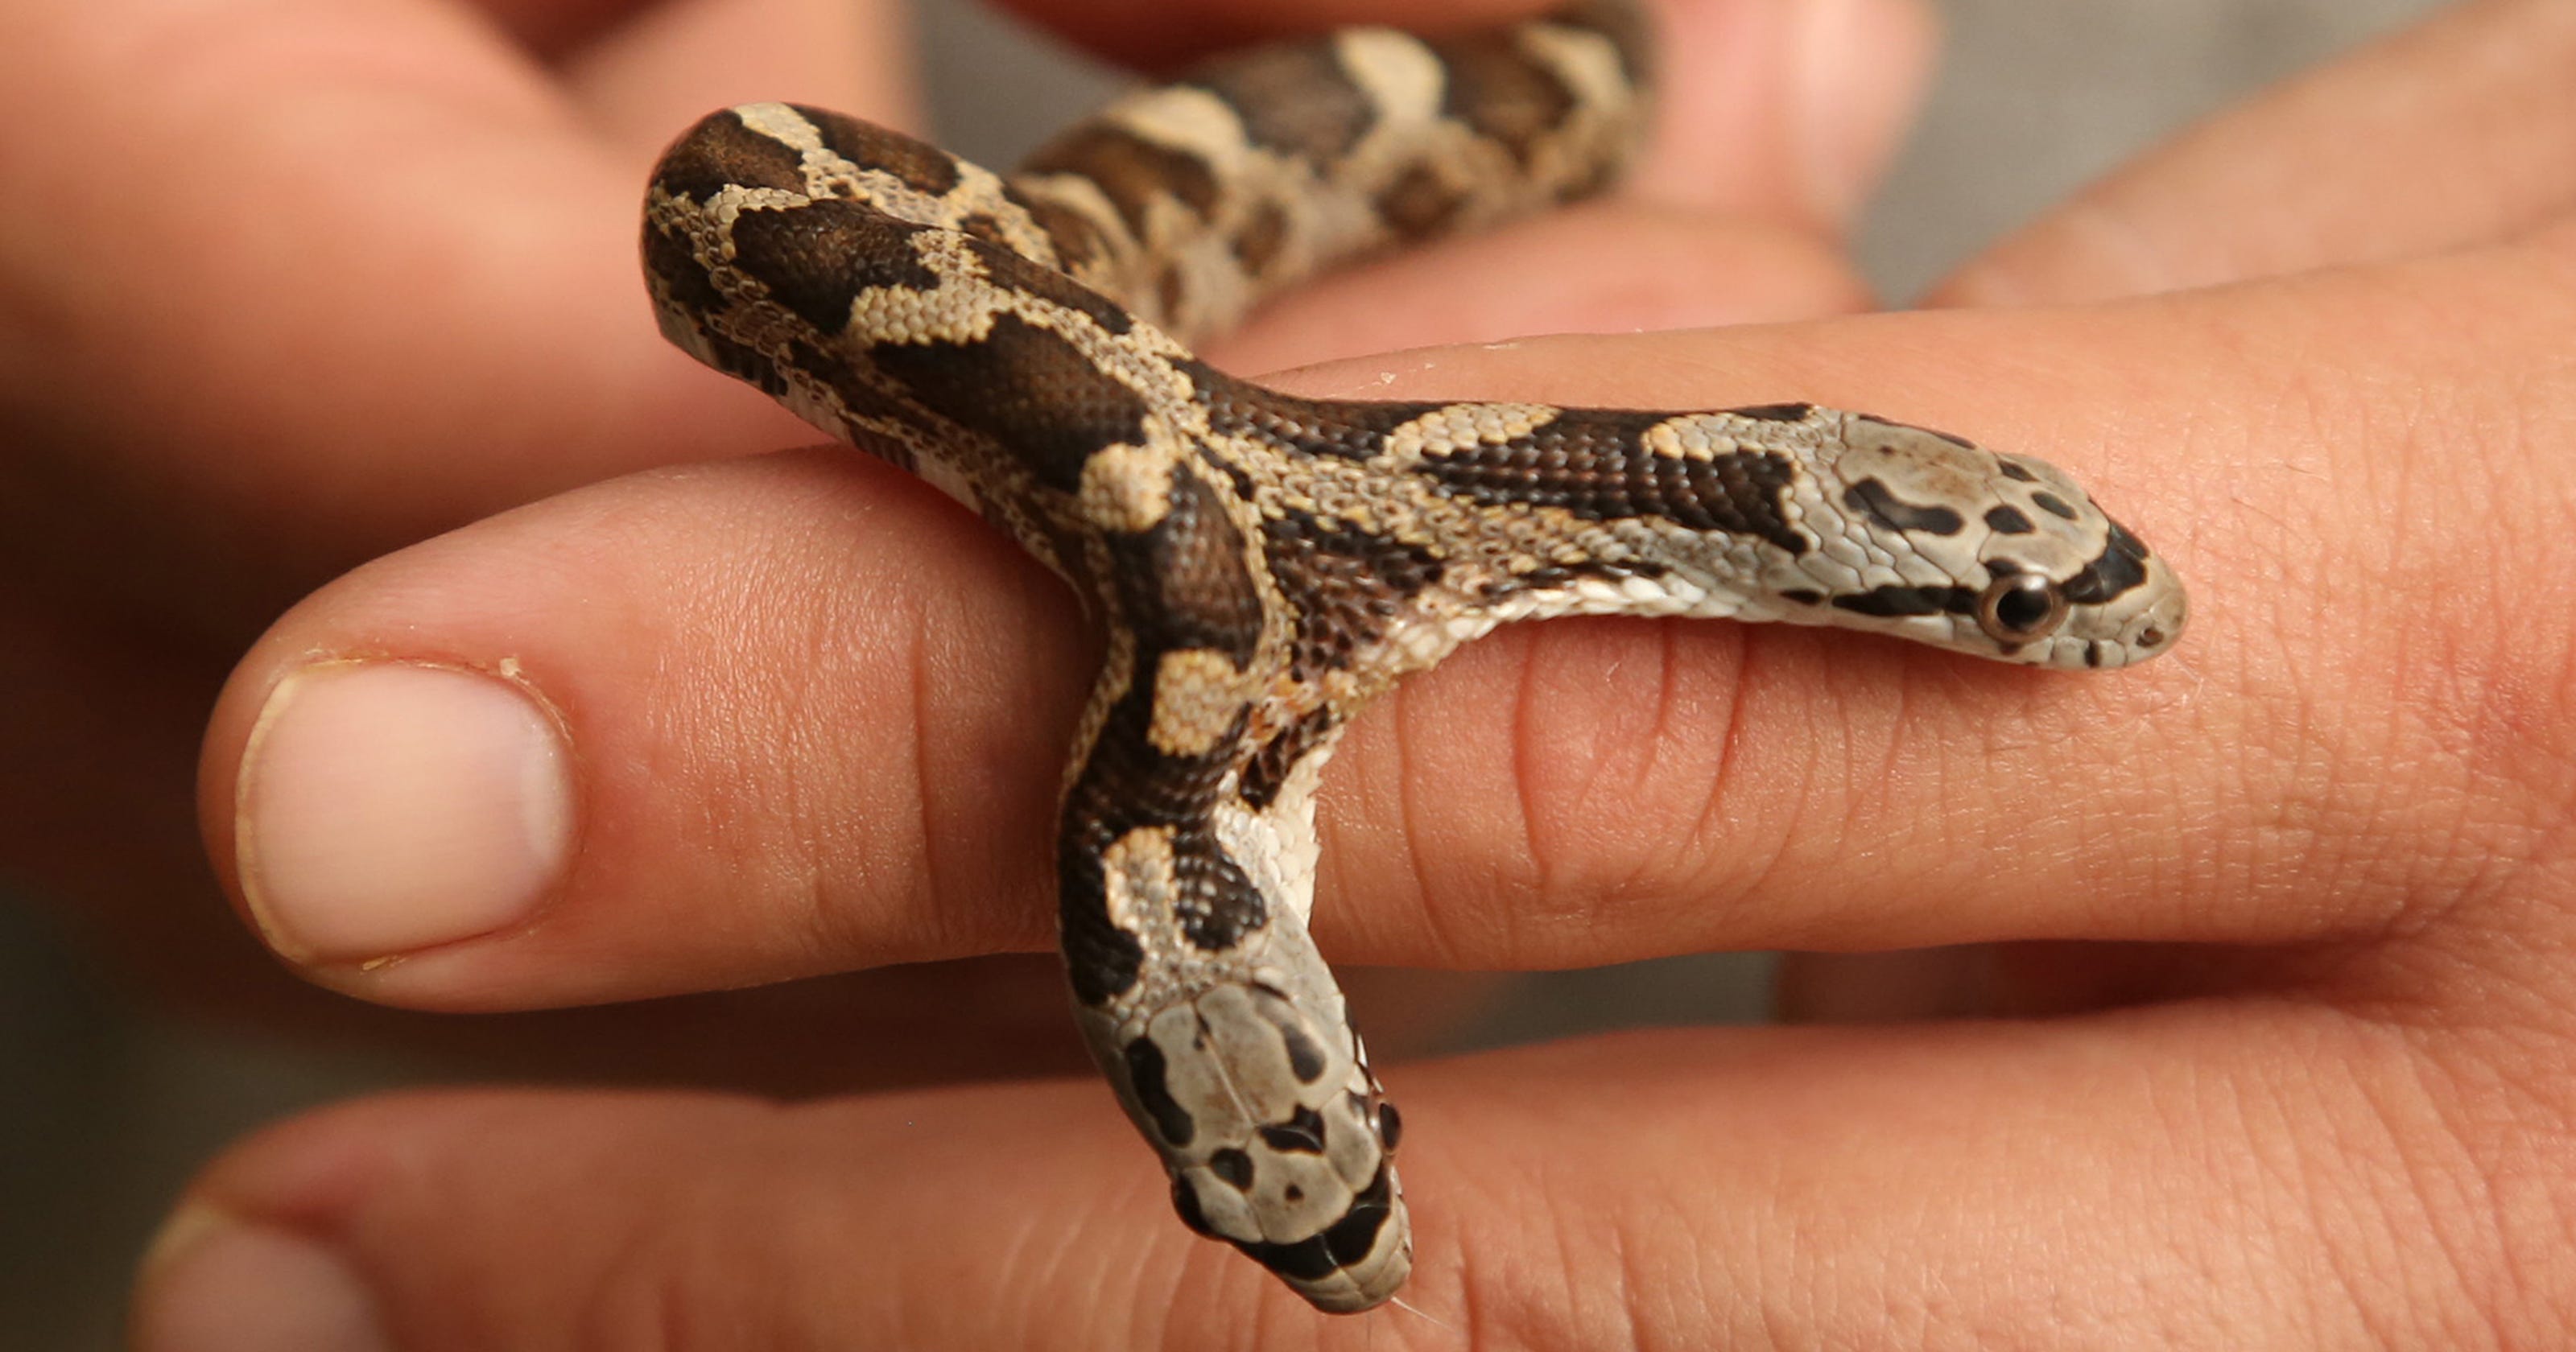 Rare Two Headed Snake Found In Texas Yard